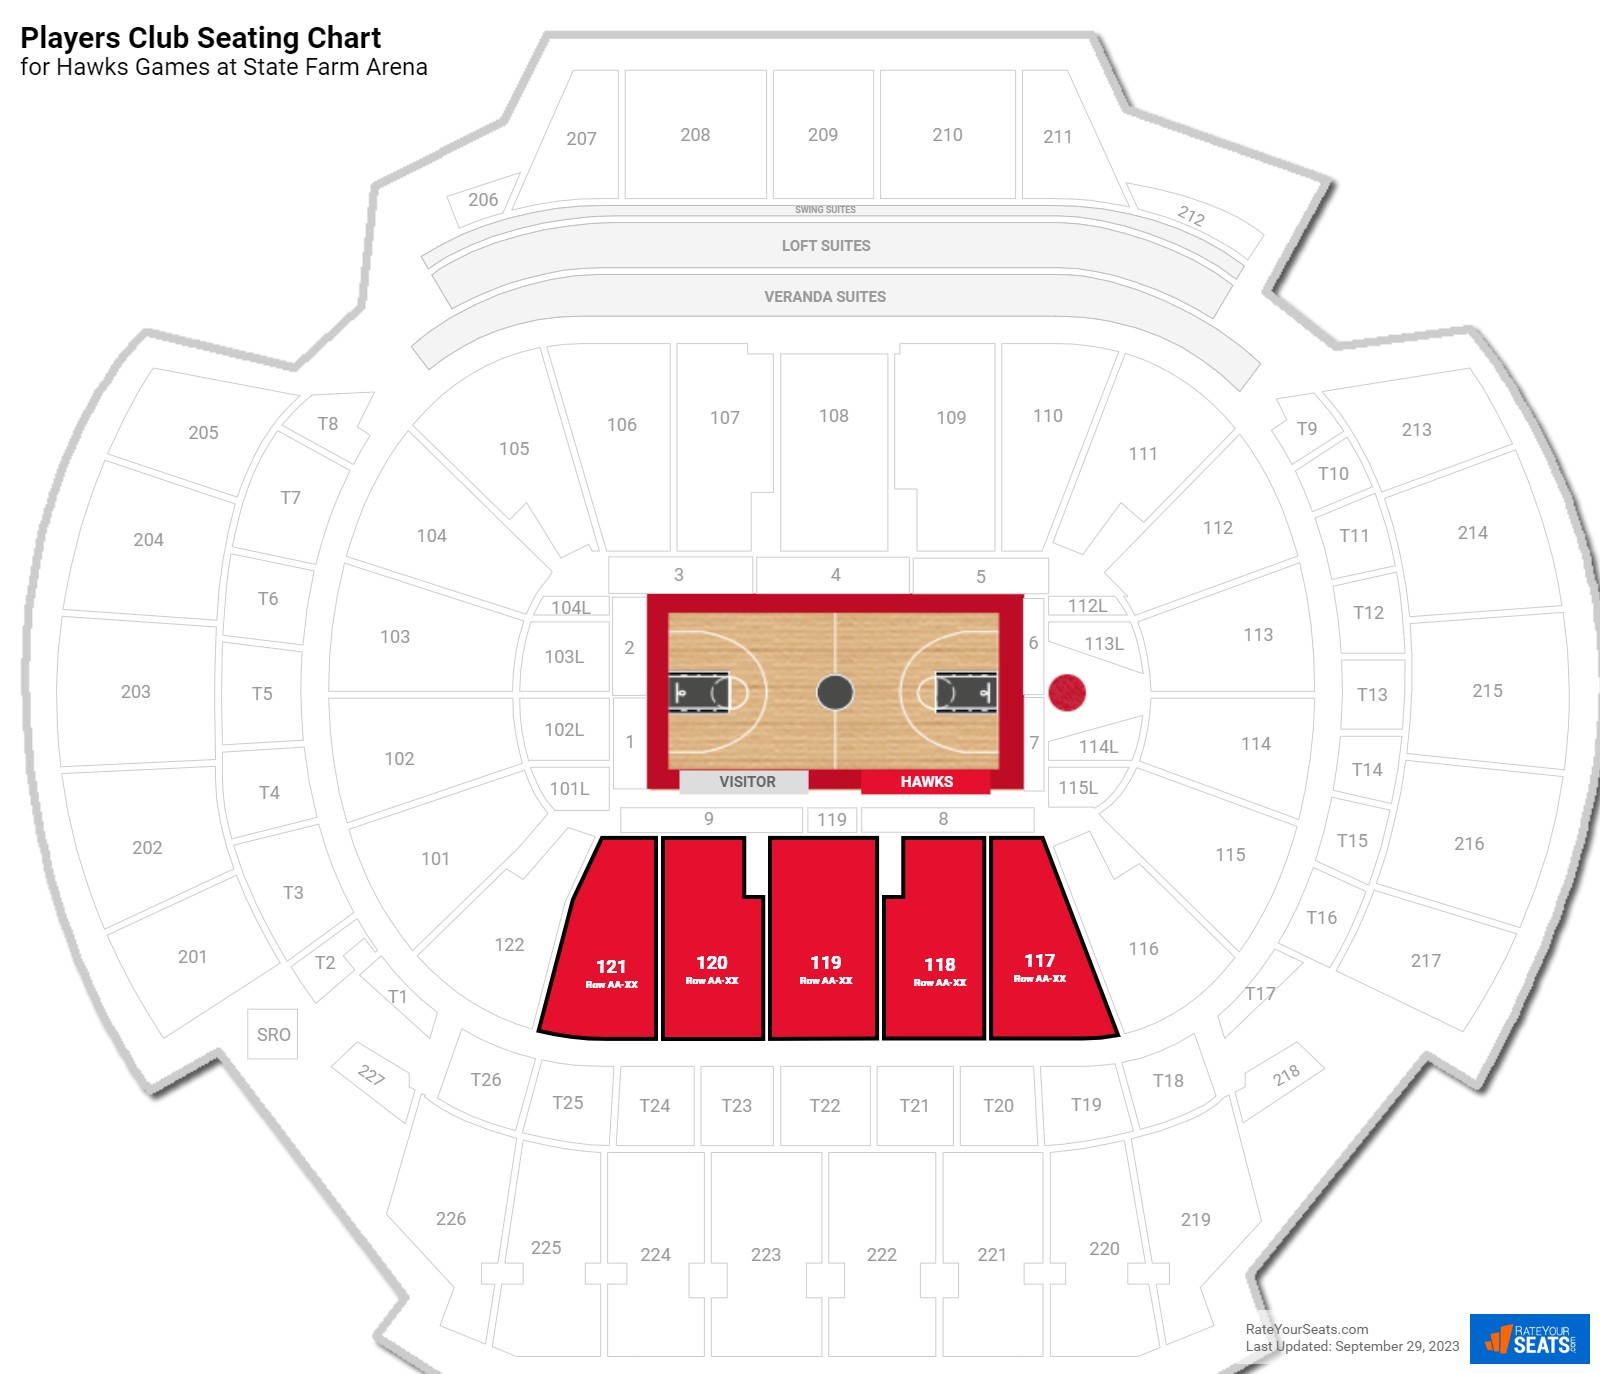 Hawks Players Club Seating Chart at State Farm Arena